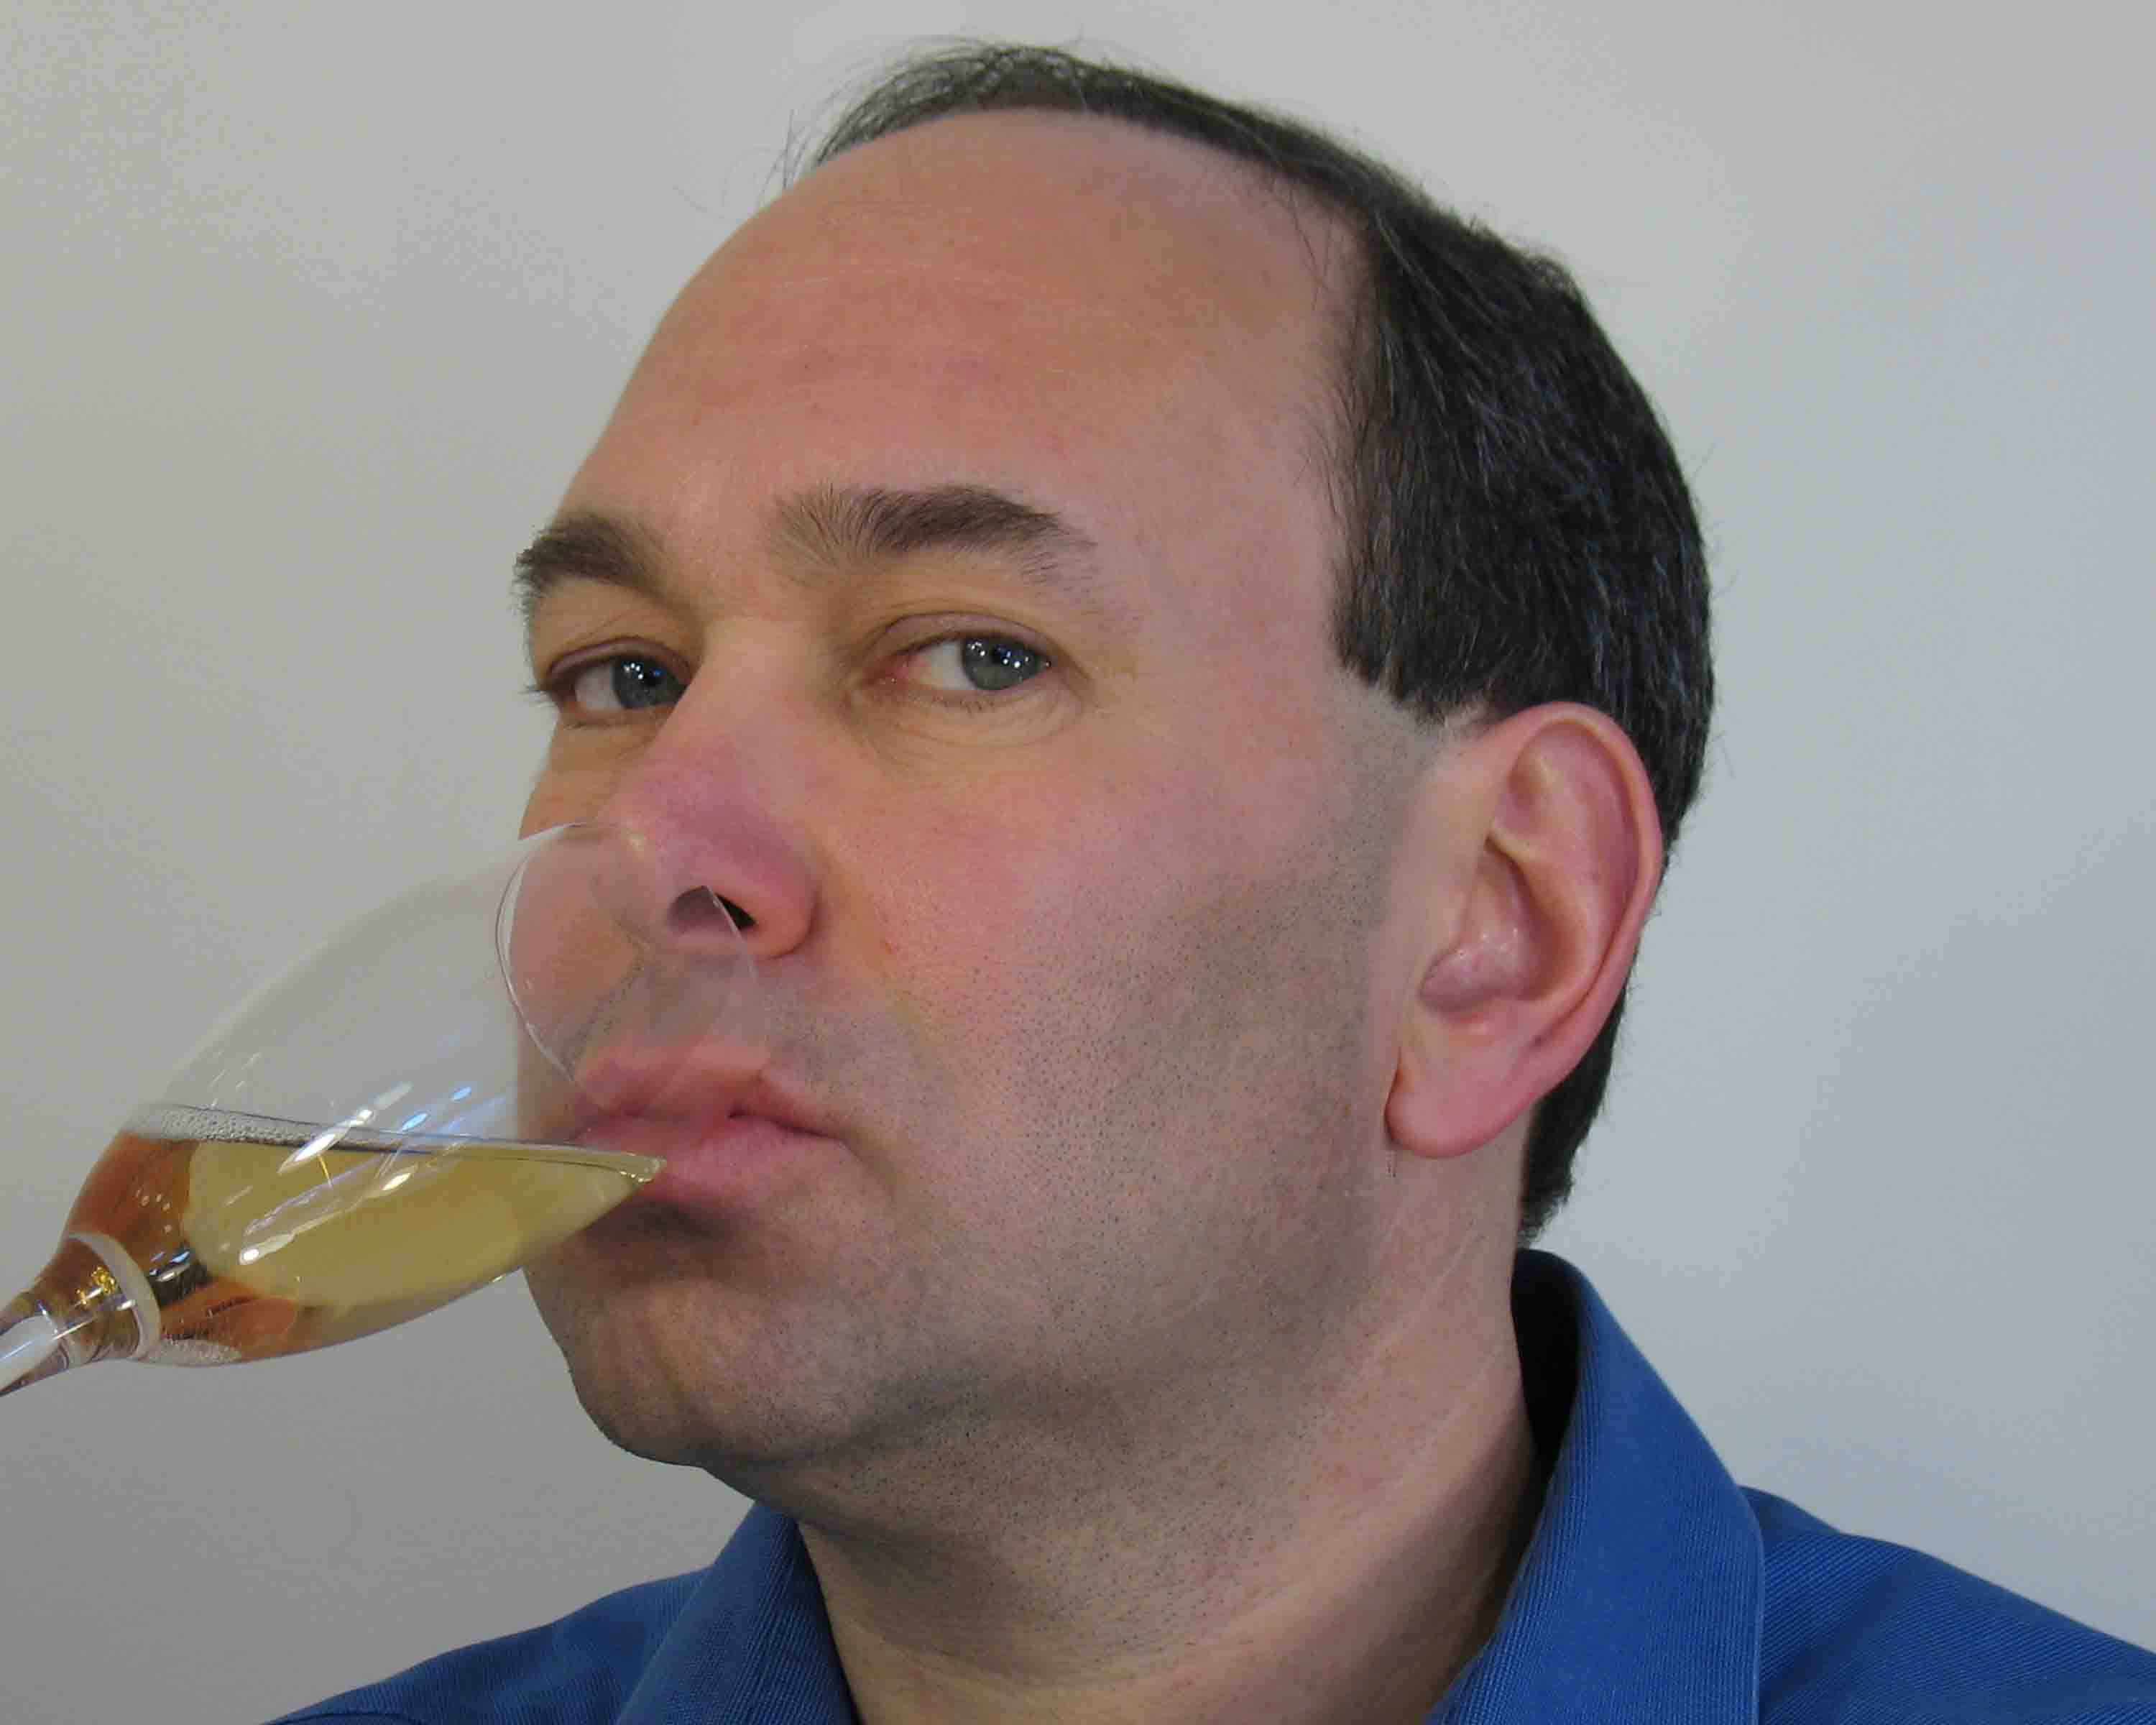 Book Shaun Eli for your next government comedy event in DC (photo of the comedian drinking Champagne)